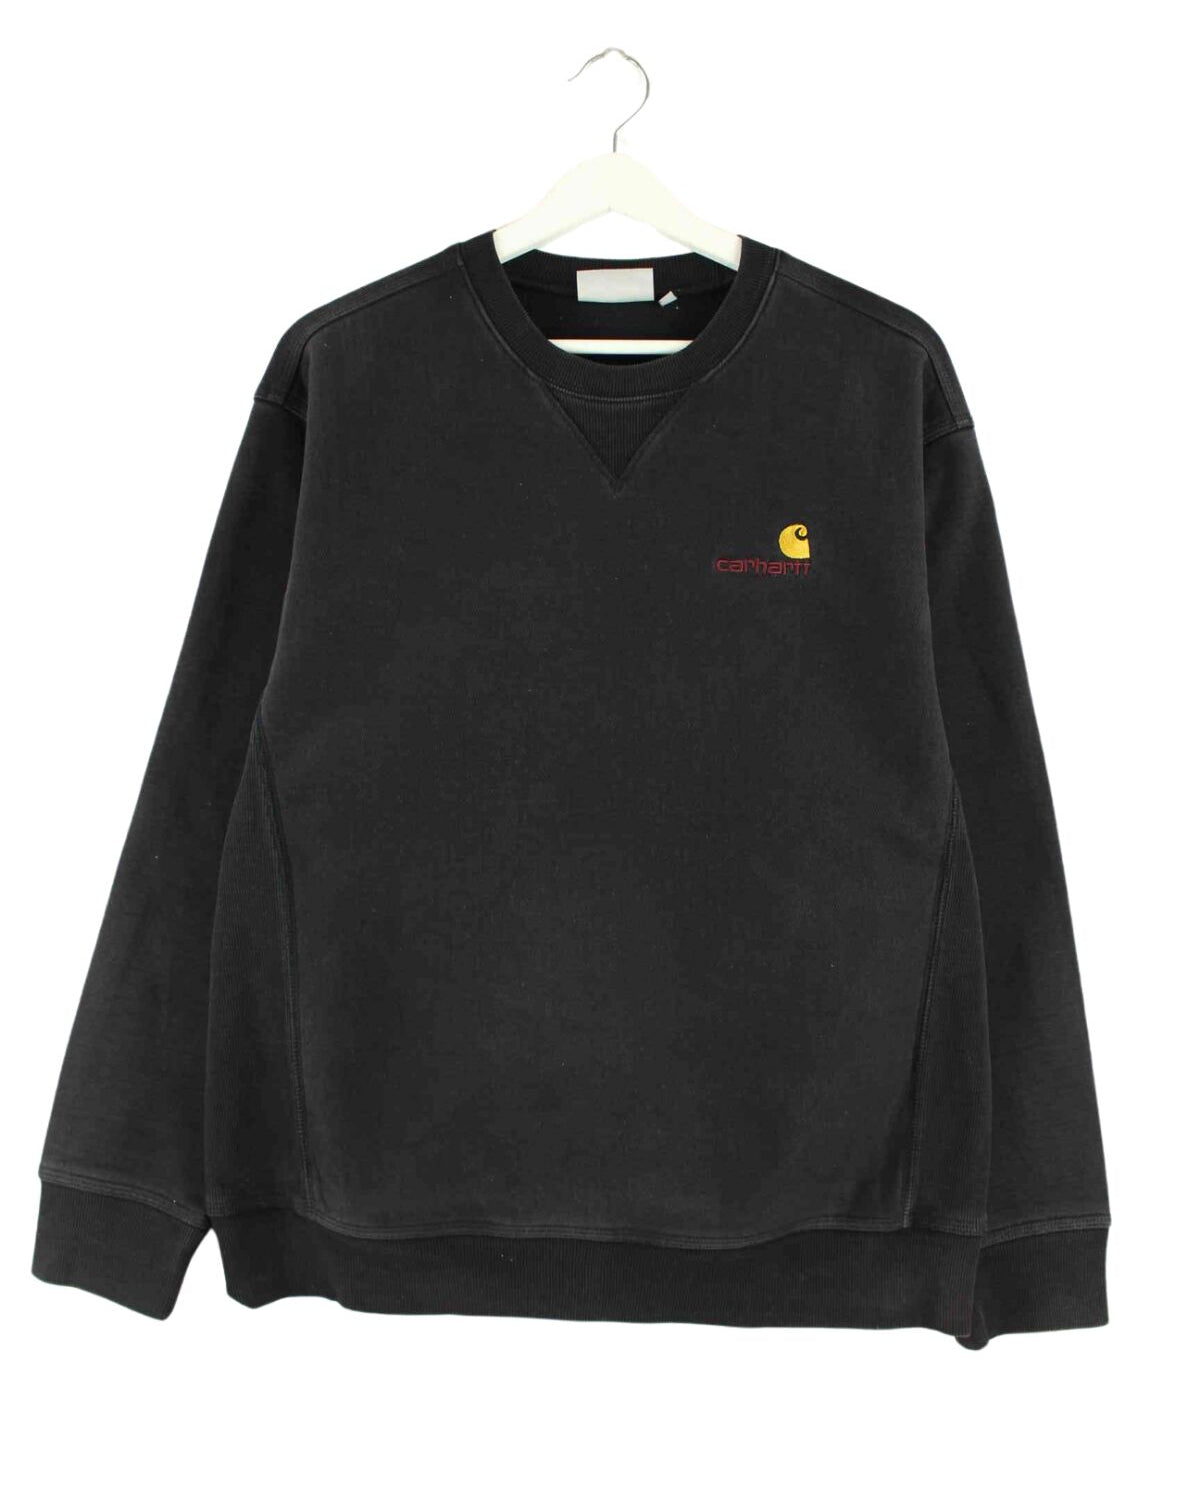 Carhartt y2k Embroidered Heavy Cotton Sweater Schwarz S (front image)